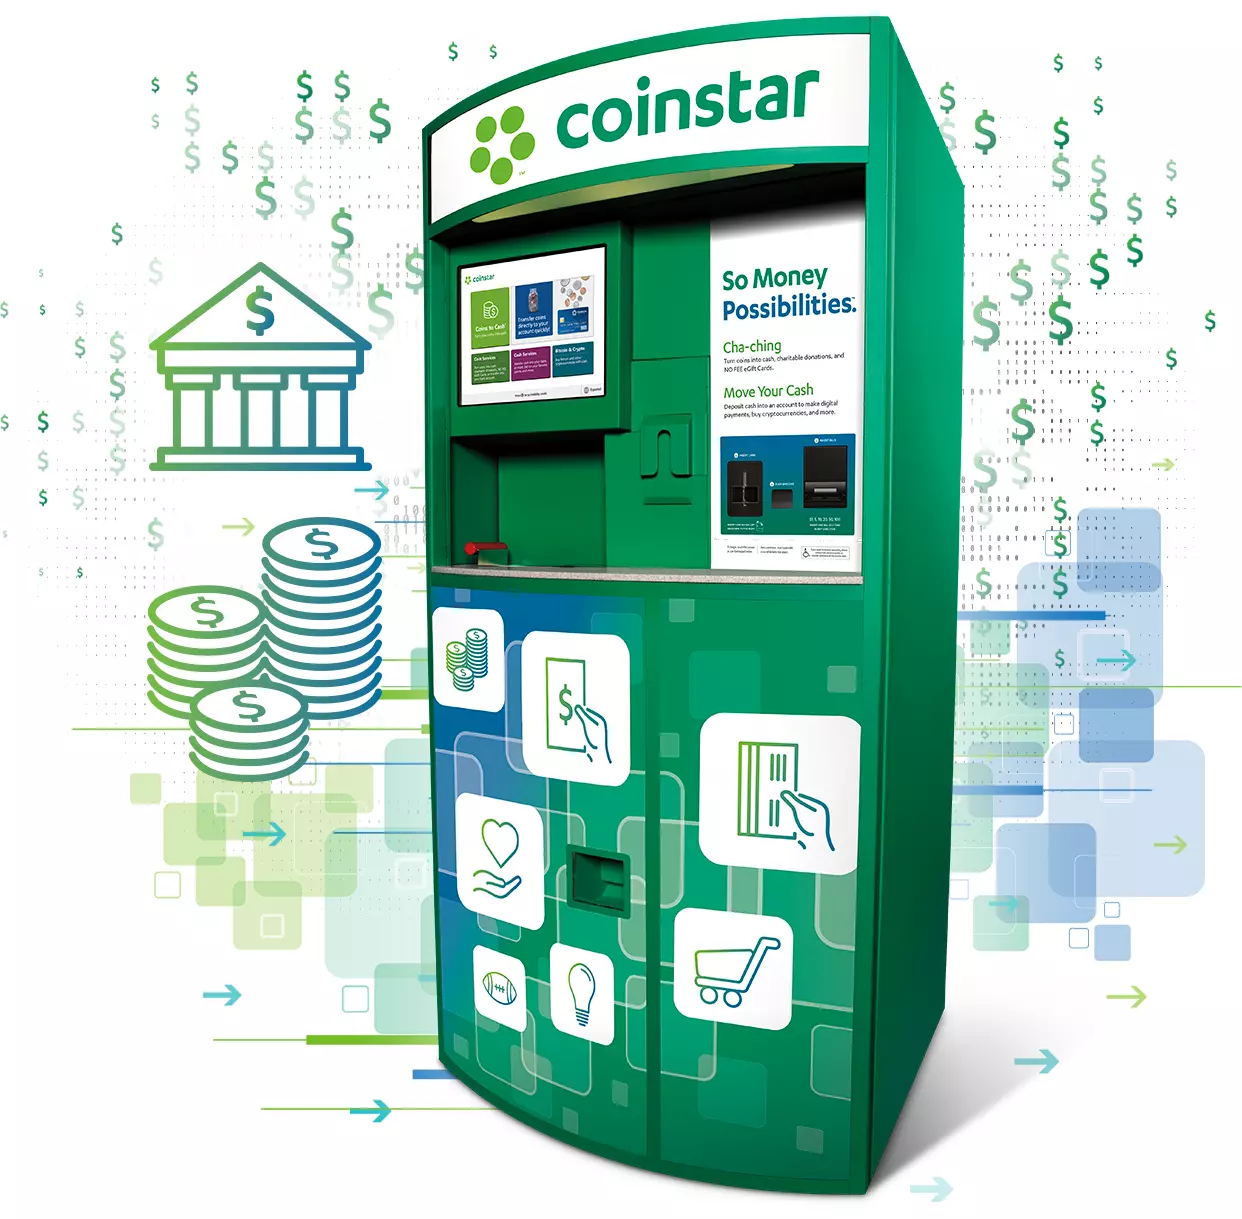 It's times more convenient to cash your coin stash with TD Canada Trust | TD Stories